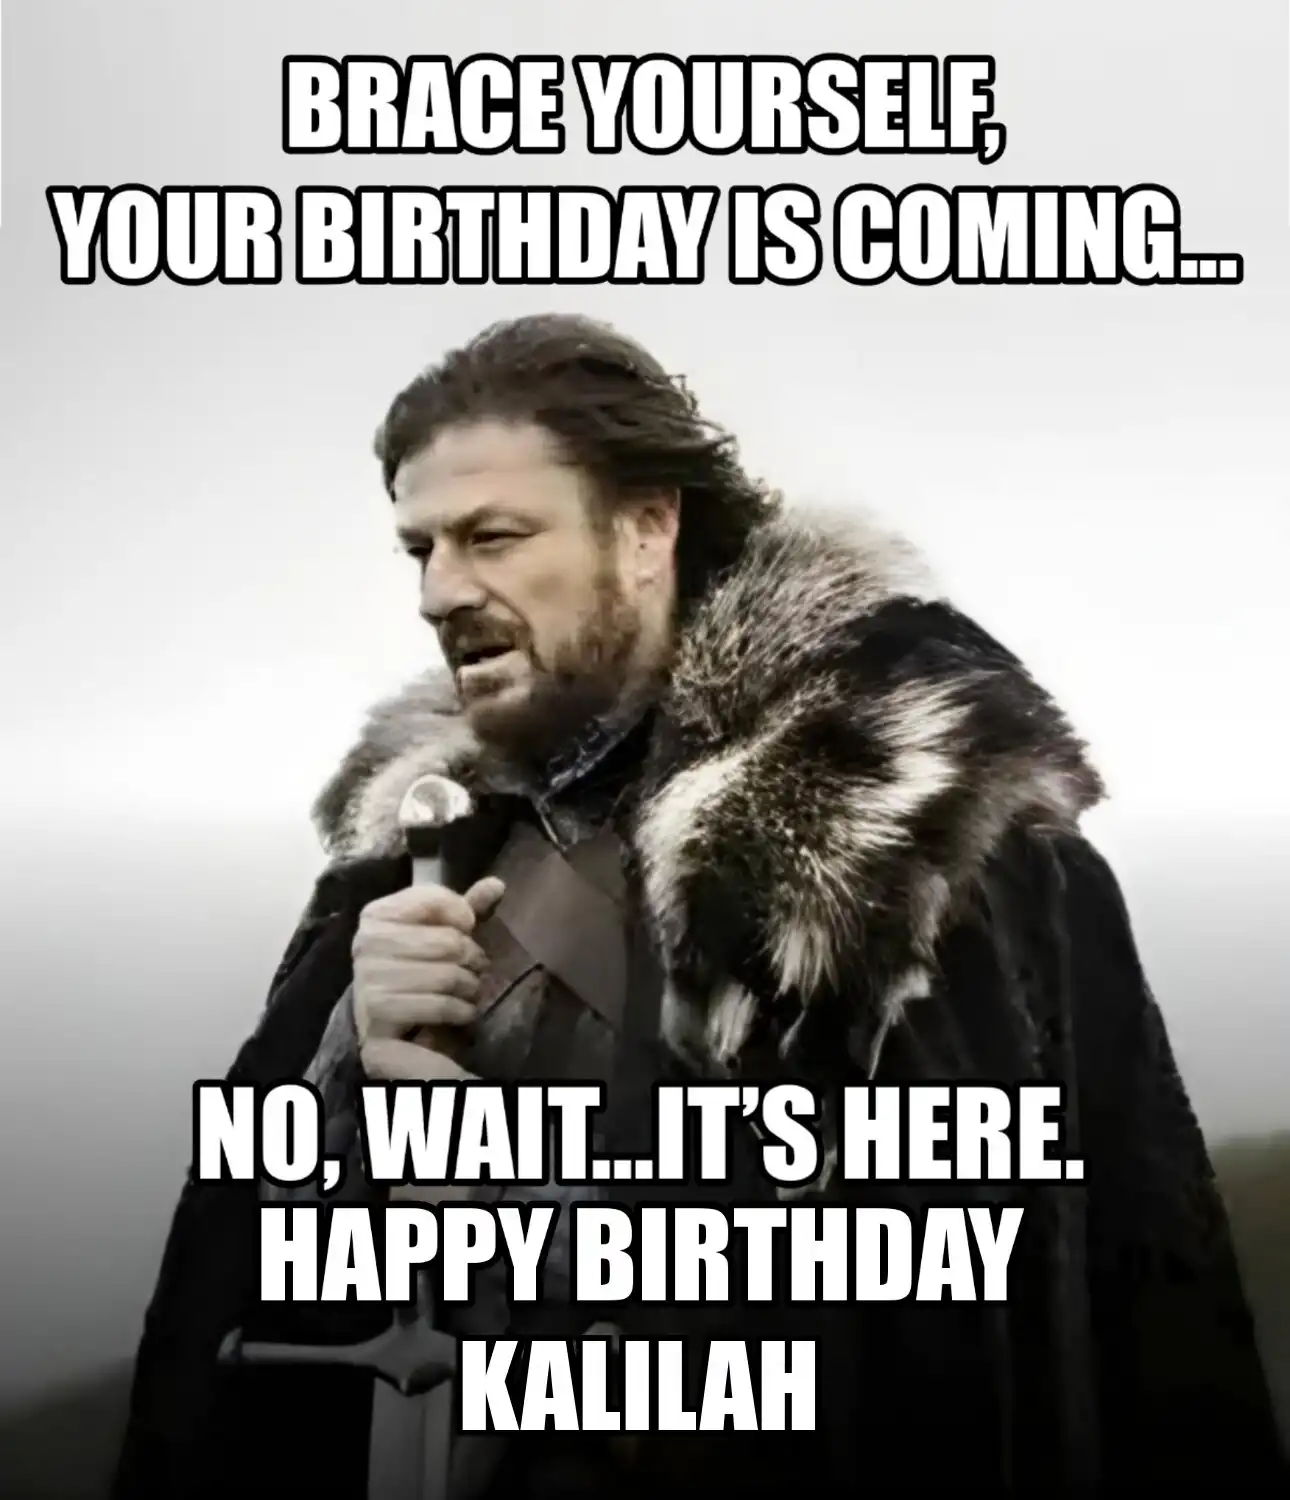 Happy Birthday Kalilah Brace Yourself Your Birthday Is Coming Meme